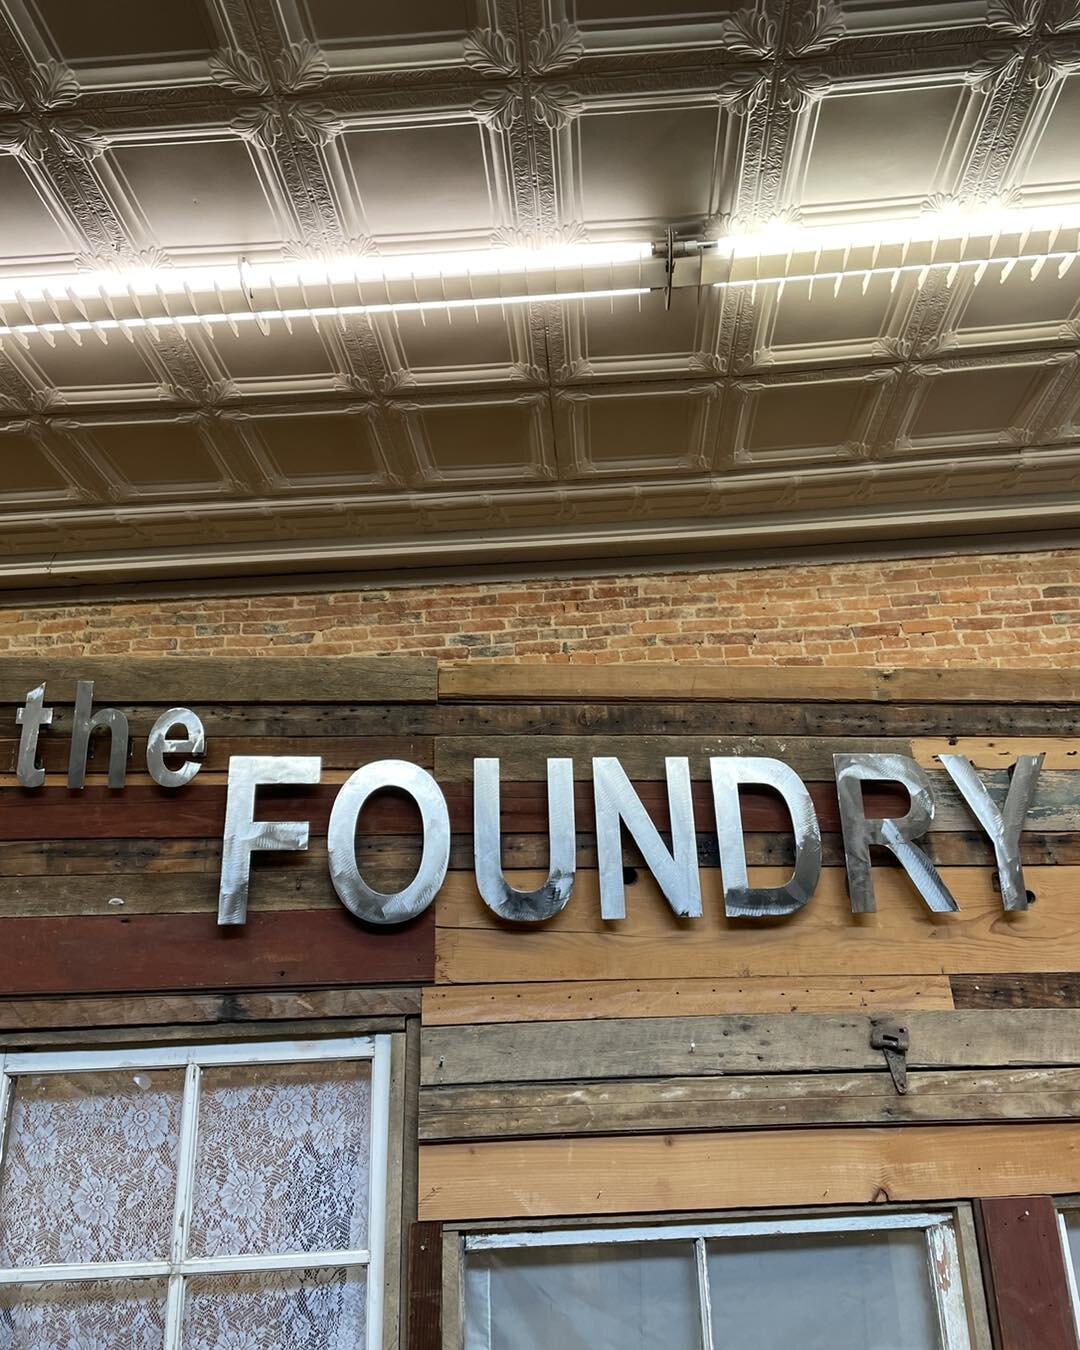 Coming soon in our new location at 54 Lincoln Way West. 

#franklincountypa #ceramics #acrylicpaintings #finditatthefoundry #foundryartmarket #chambersburgpa #landscapes